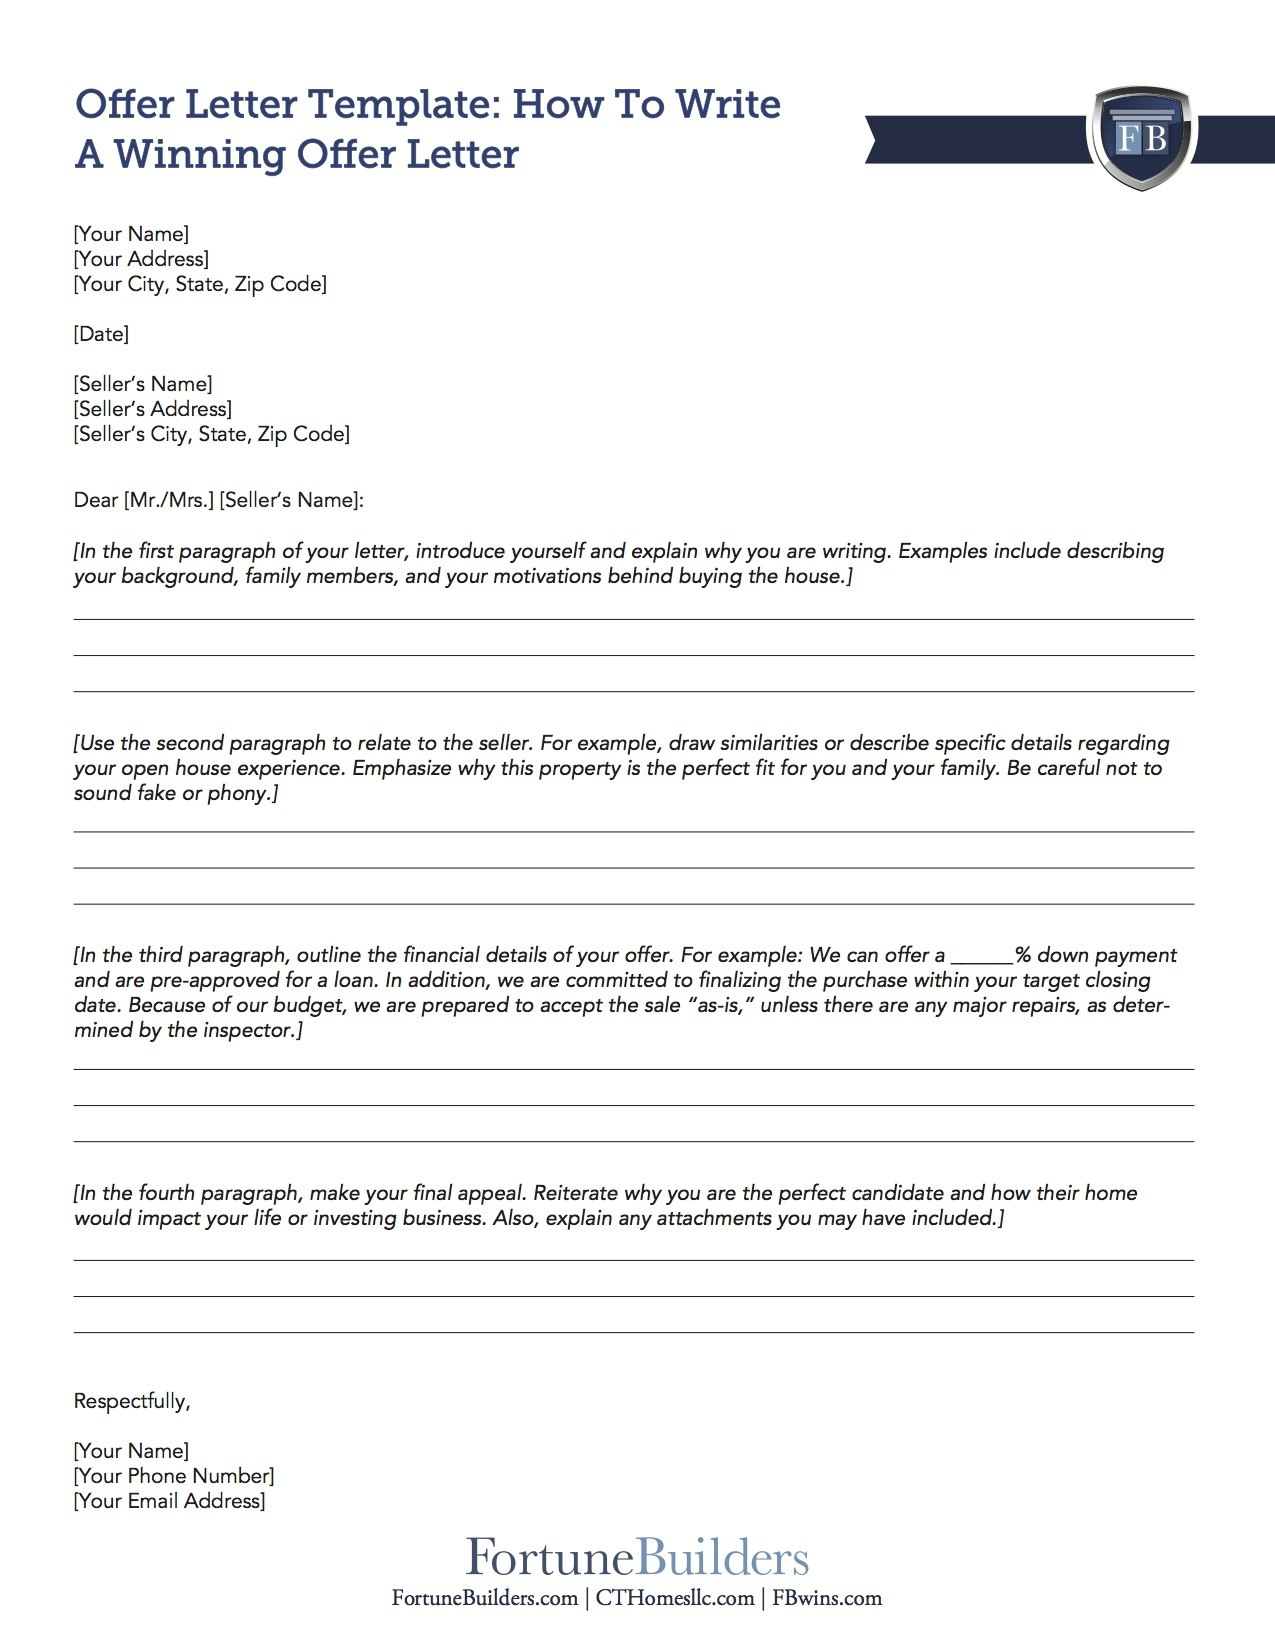 Free Real Estate Offer Letter Template  Fortunebuilders within Home Offer Letter Template